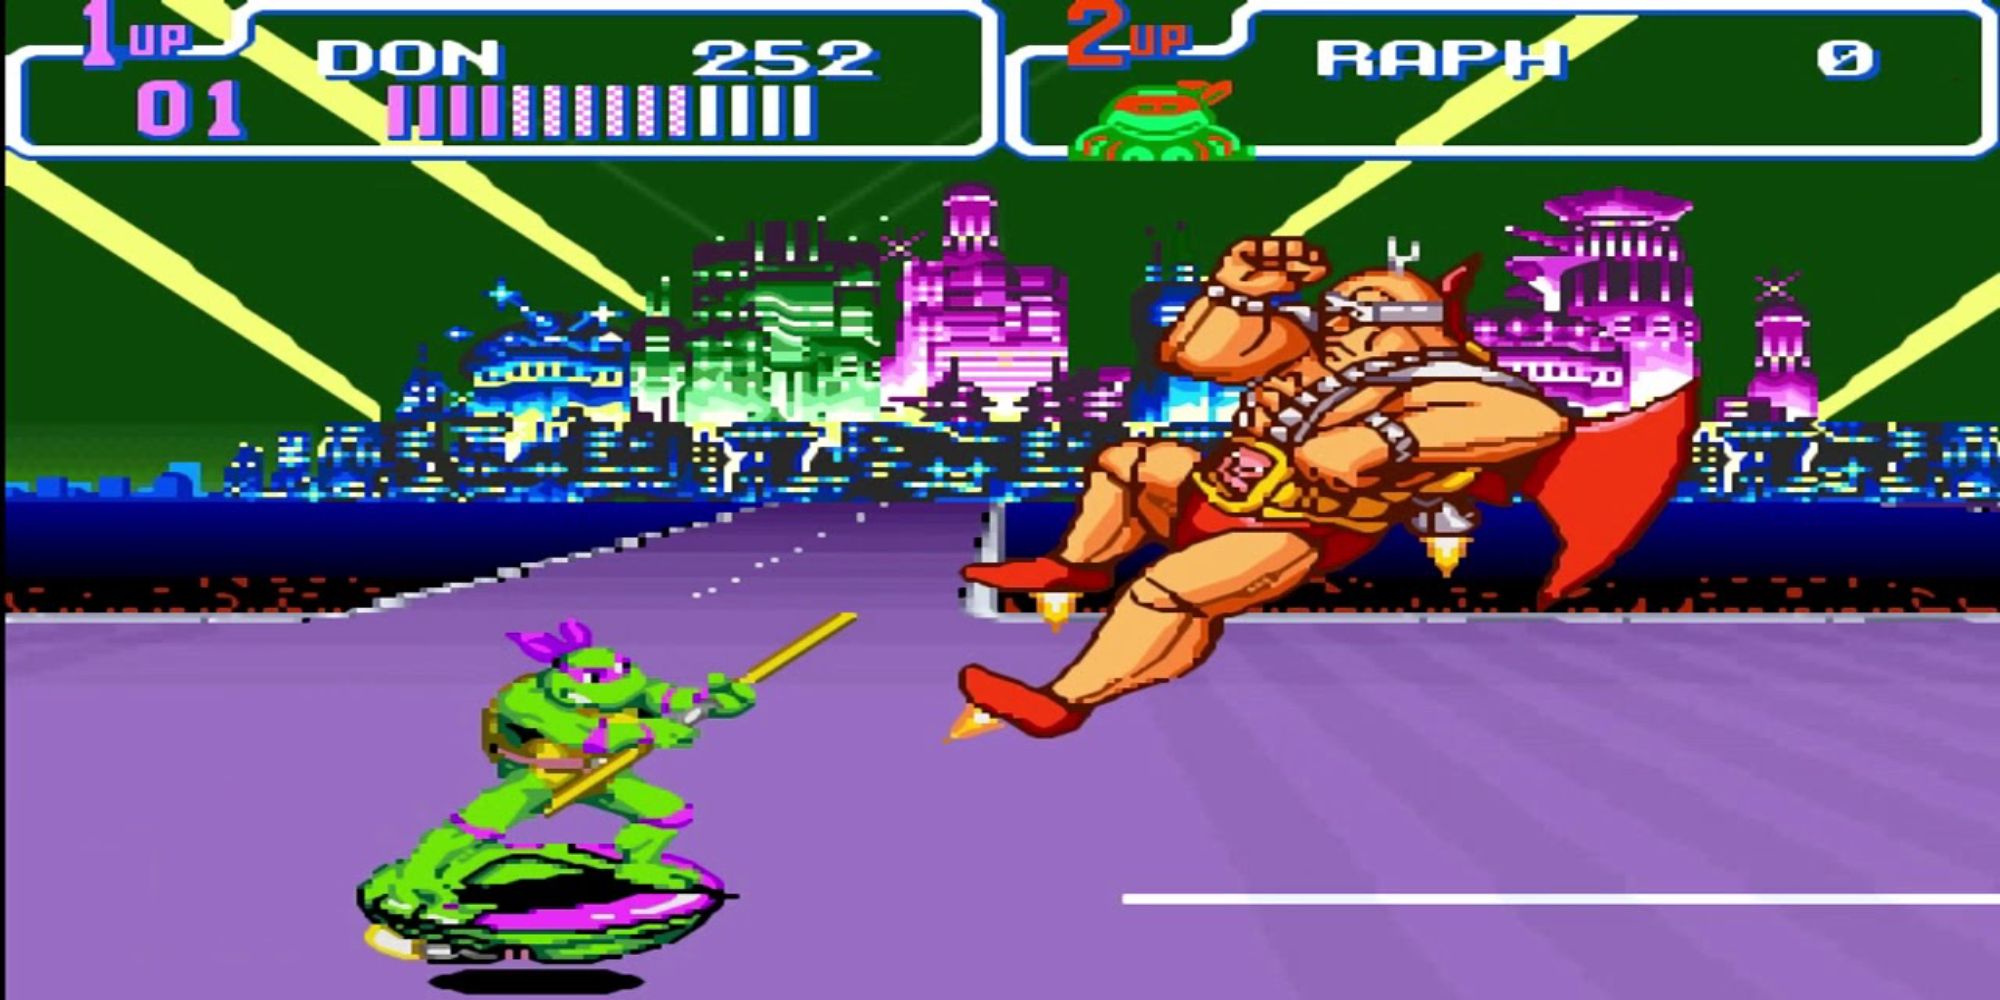 Donatello fighting Krang on a hoverboard